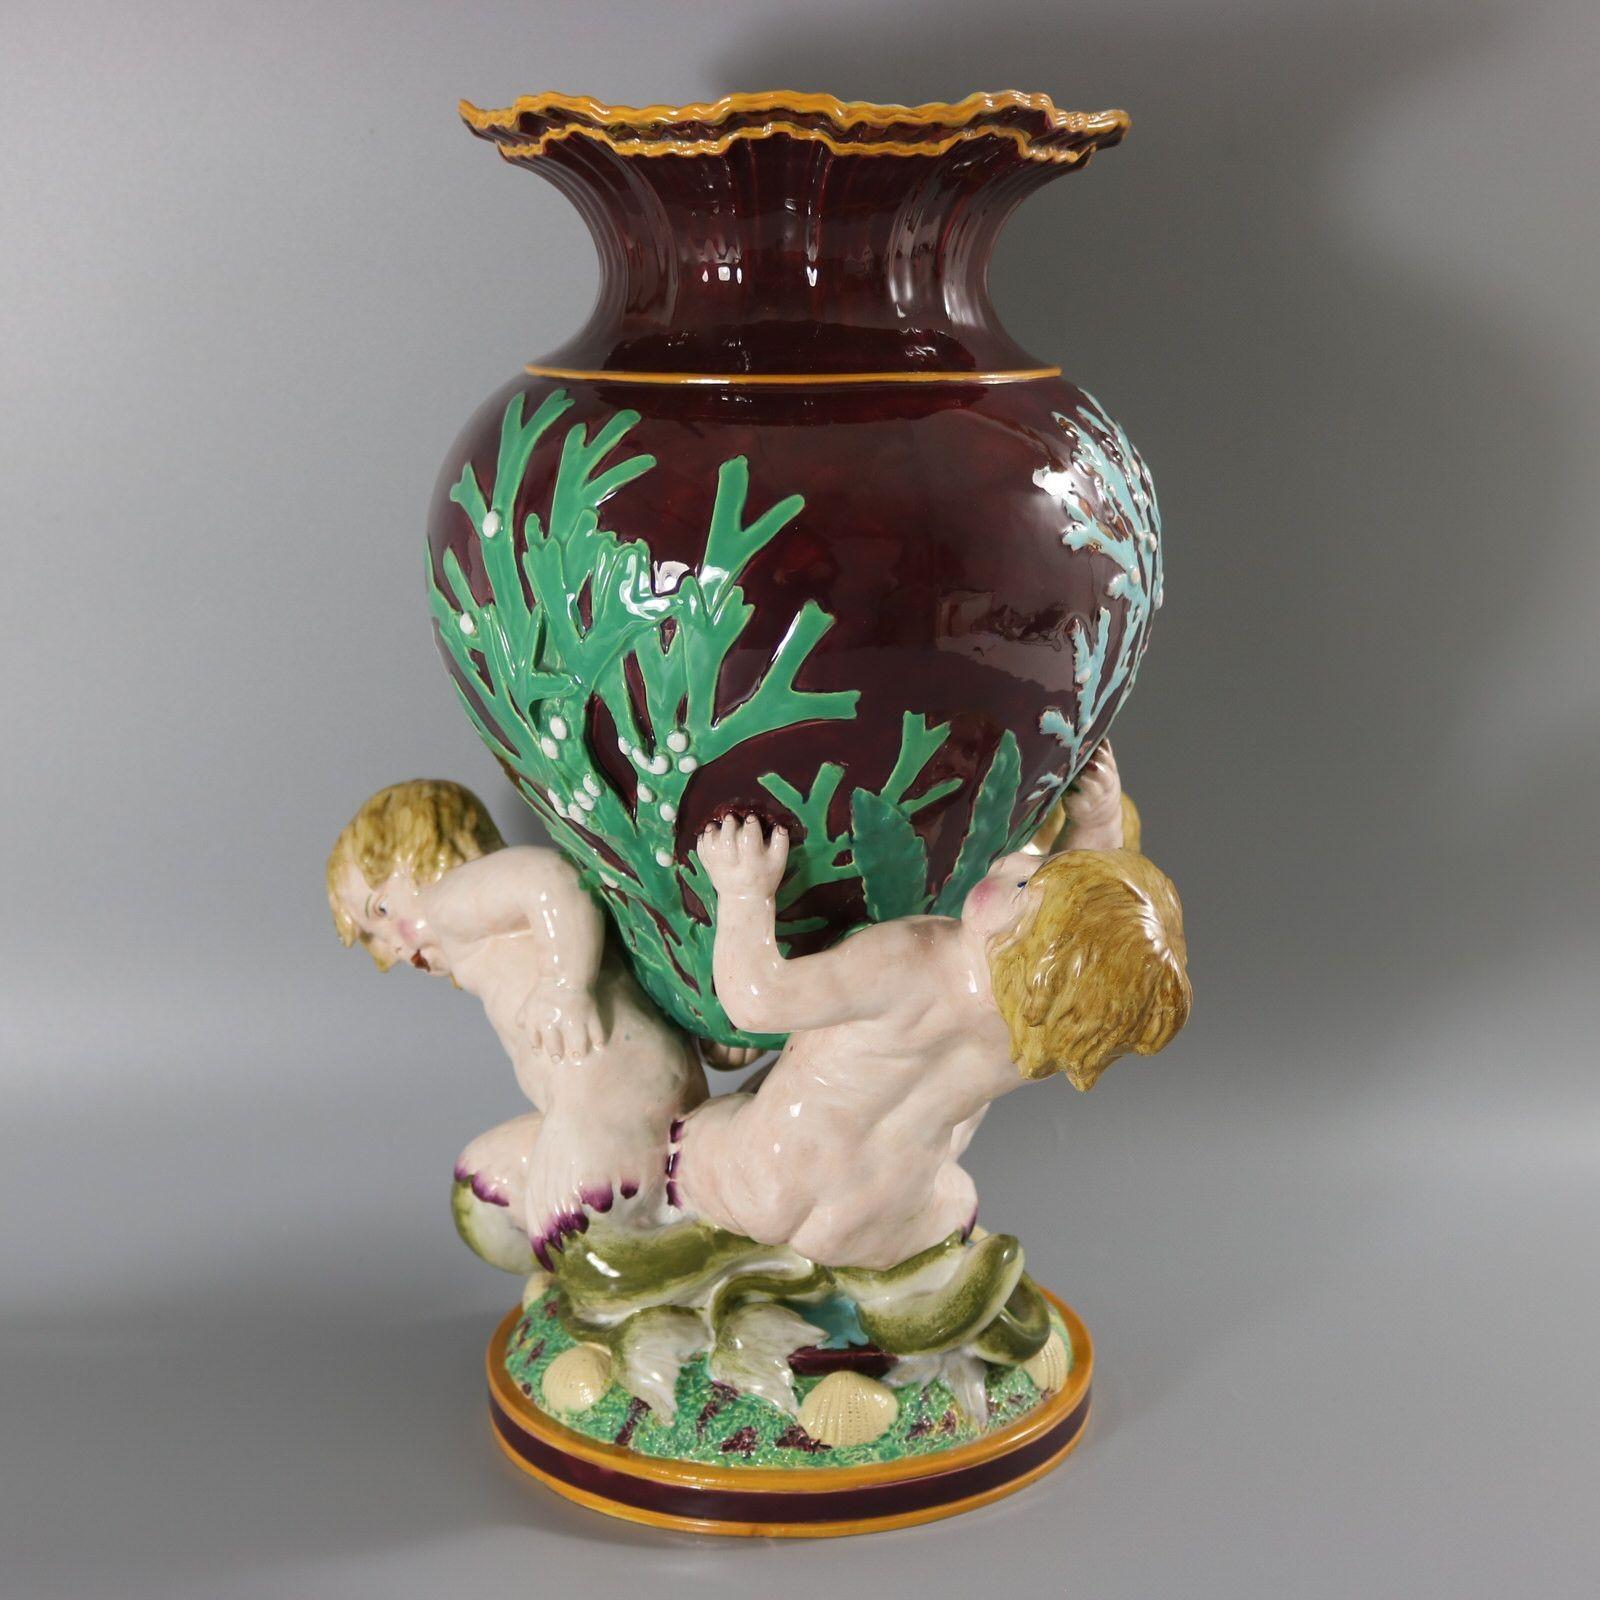 Minton Majolica vase which features three merboys supporting a vessel adorned with seaweeds. The rim of the vase is modelled to depict breaking waves. Dark maroon ground version. Colouration: dark maroon, green, pink, are predominant.